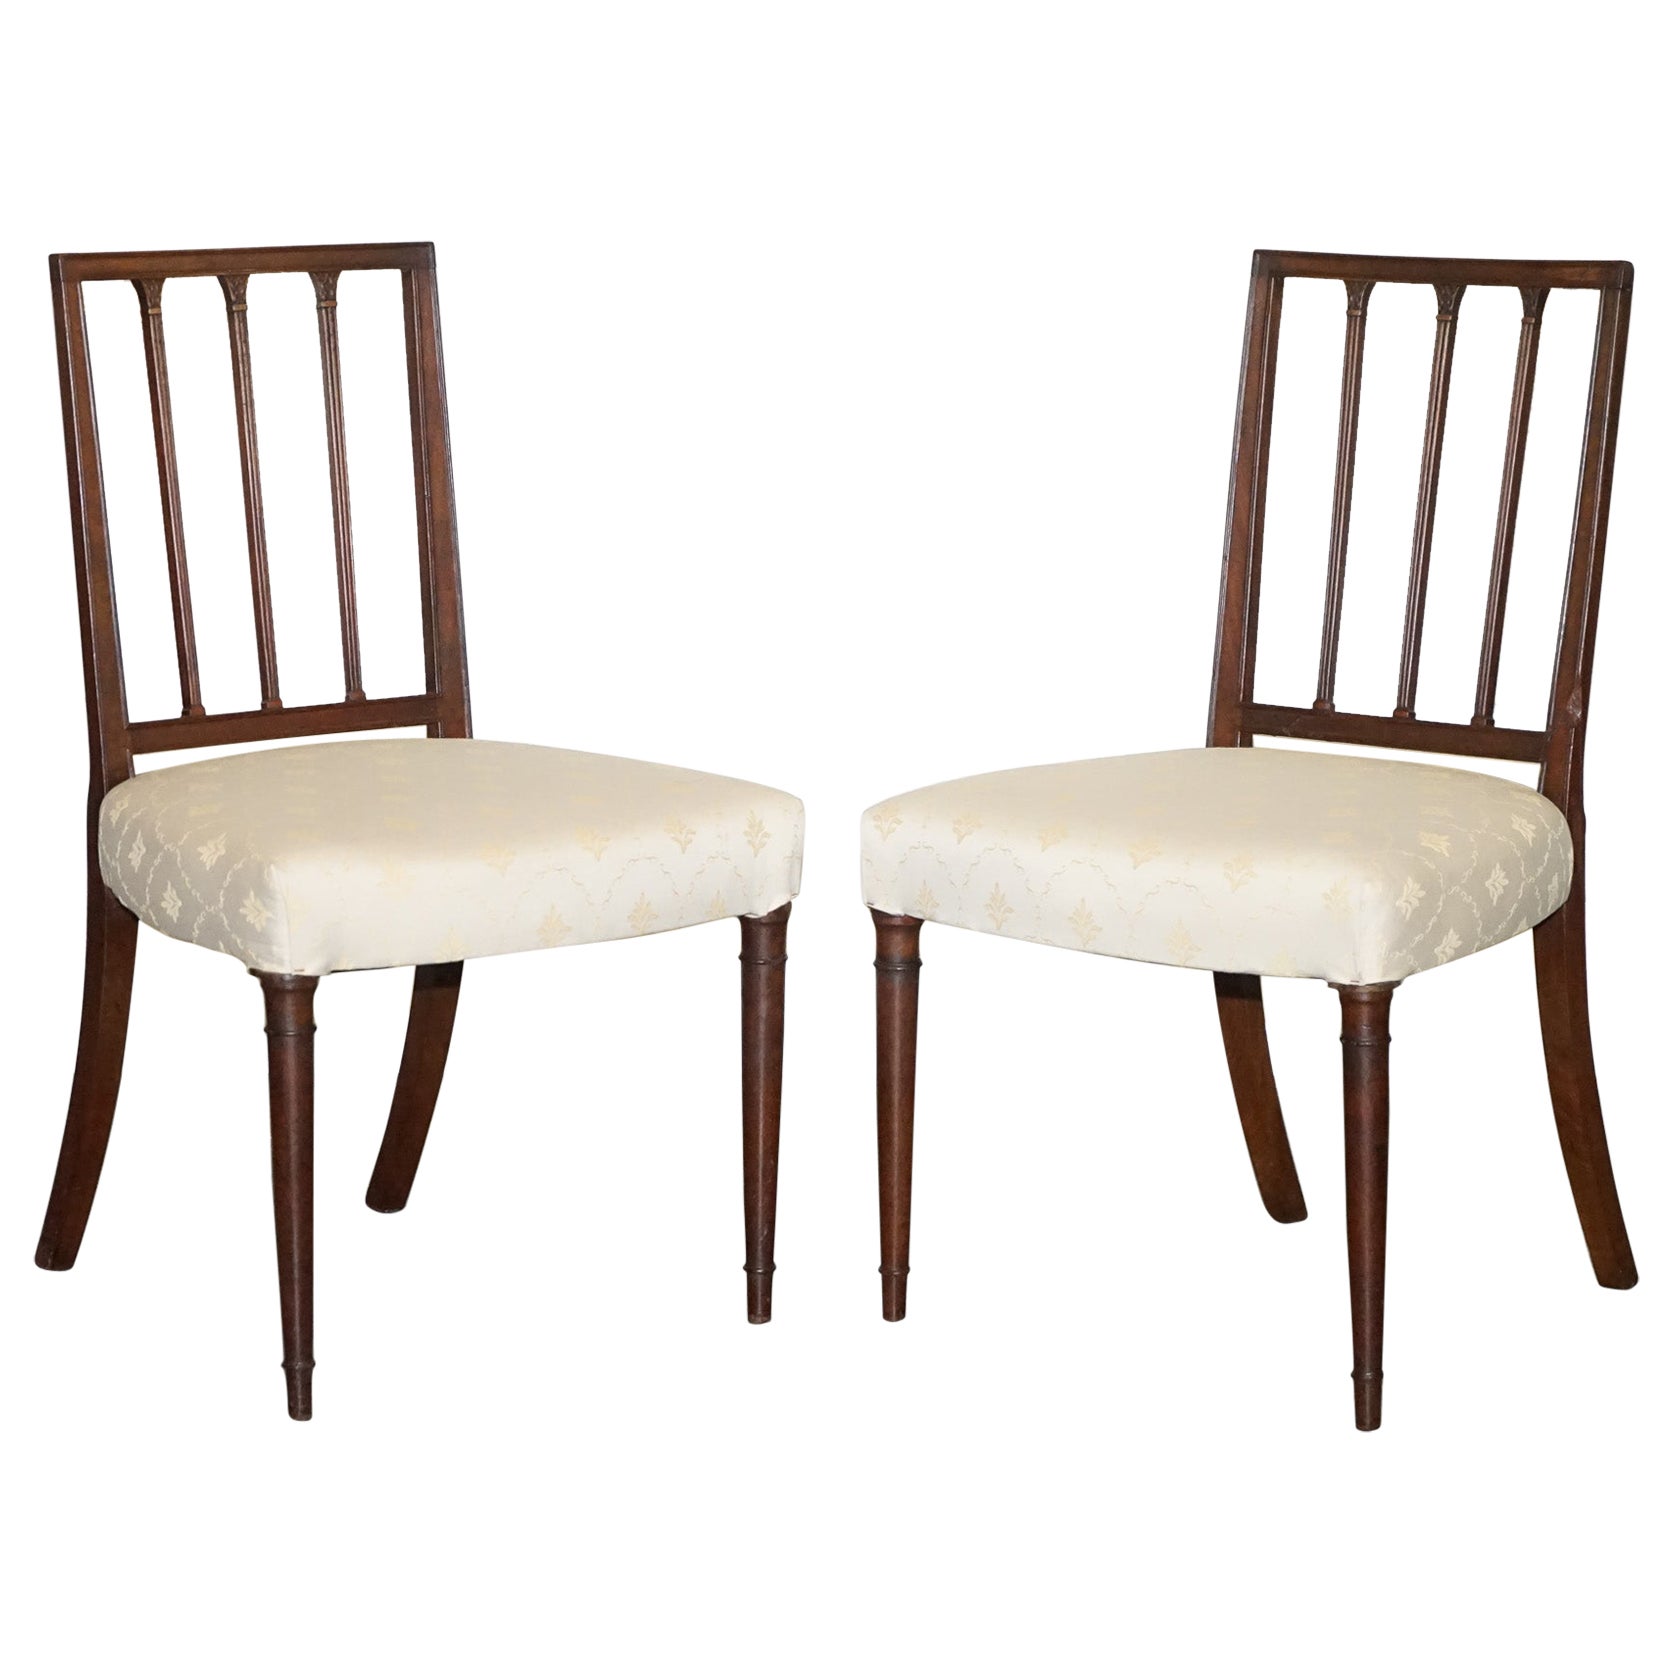 VICTORIAN PAiR OF SIDE CHAIRS WITH CREAM FABRIC SEATS For Sale